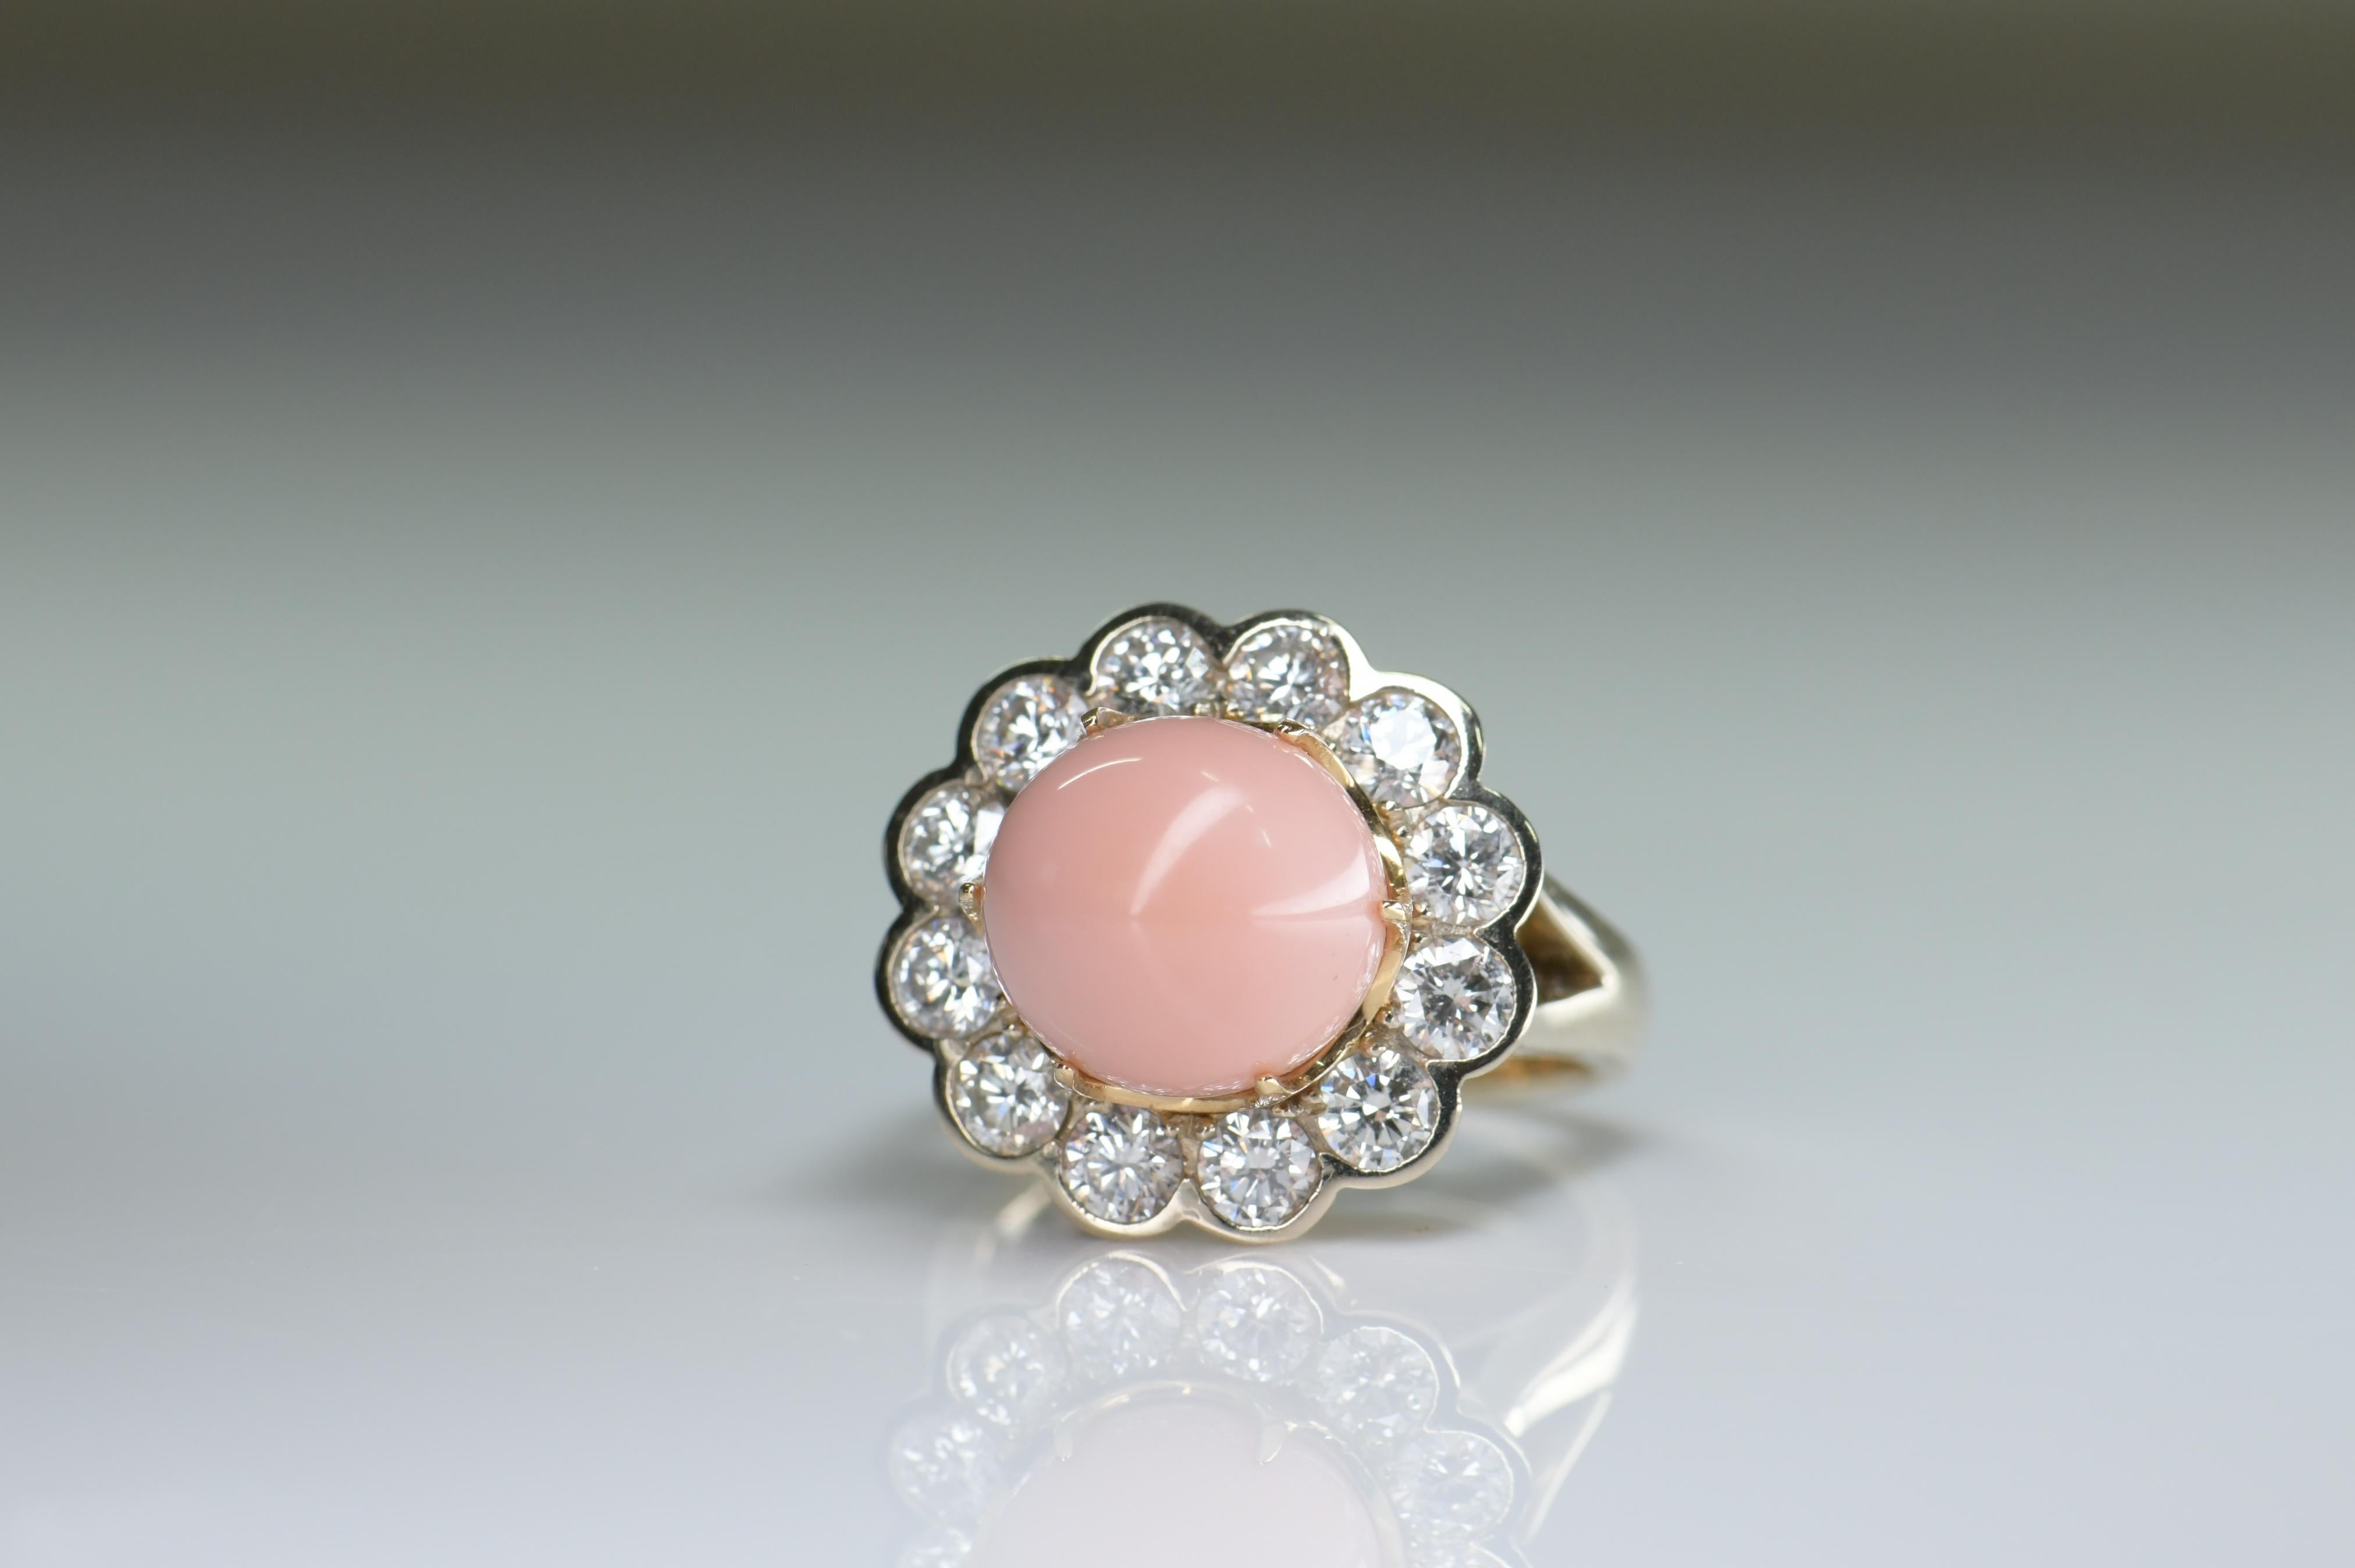 A gorgeous pink natural conch pearl is nestled in this classic Edwardian style halo mounting finely handcrafted over 18 karat yellow gold and framed by 1.6 carat of sparkling round diamonds. Conch pearls are a very rare natural pearl from the Queen